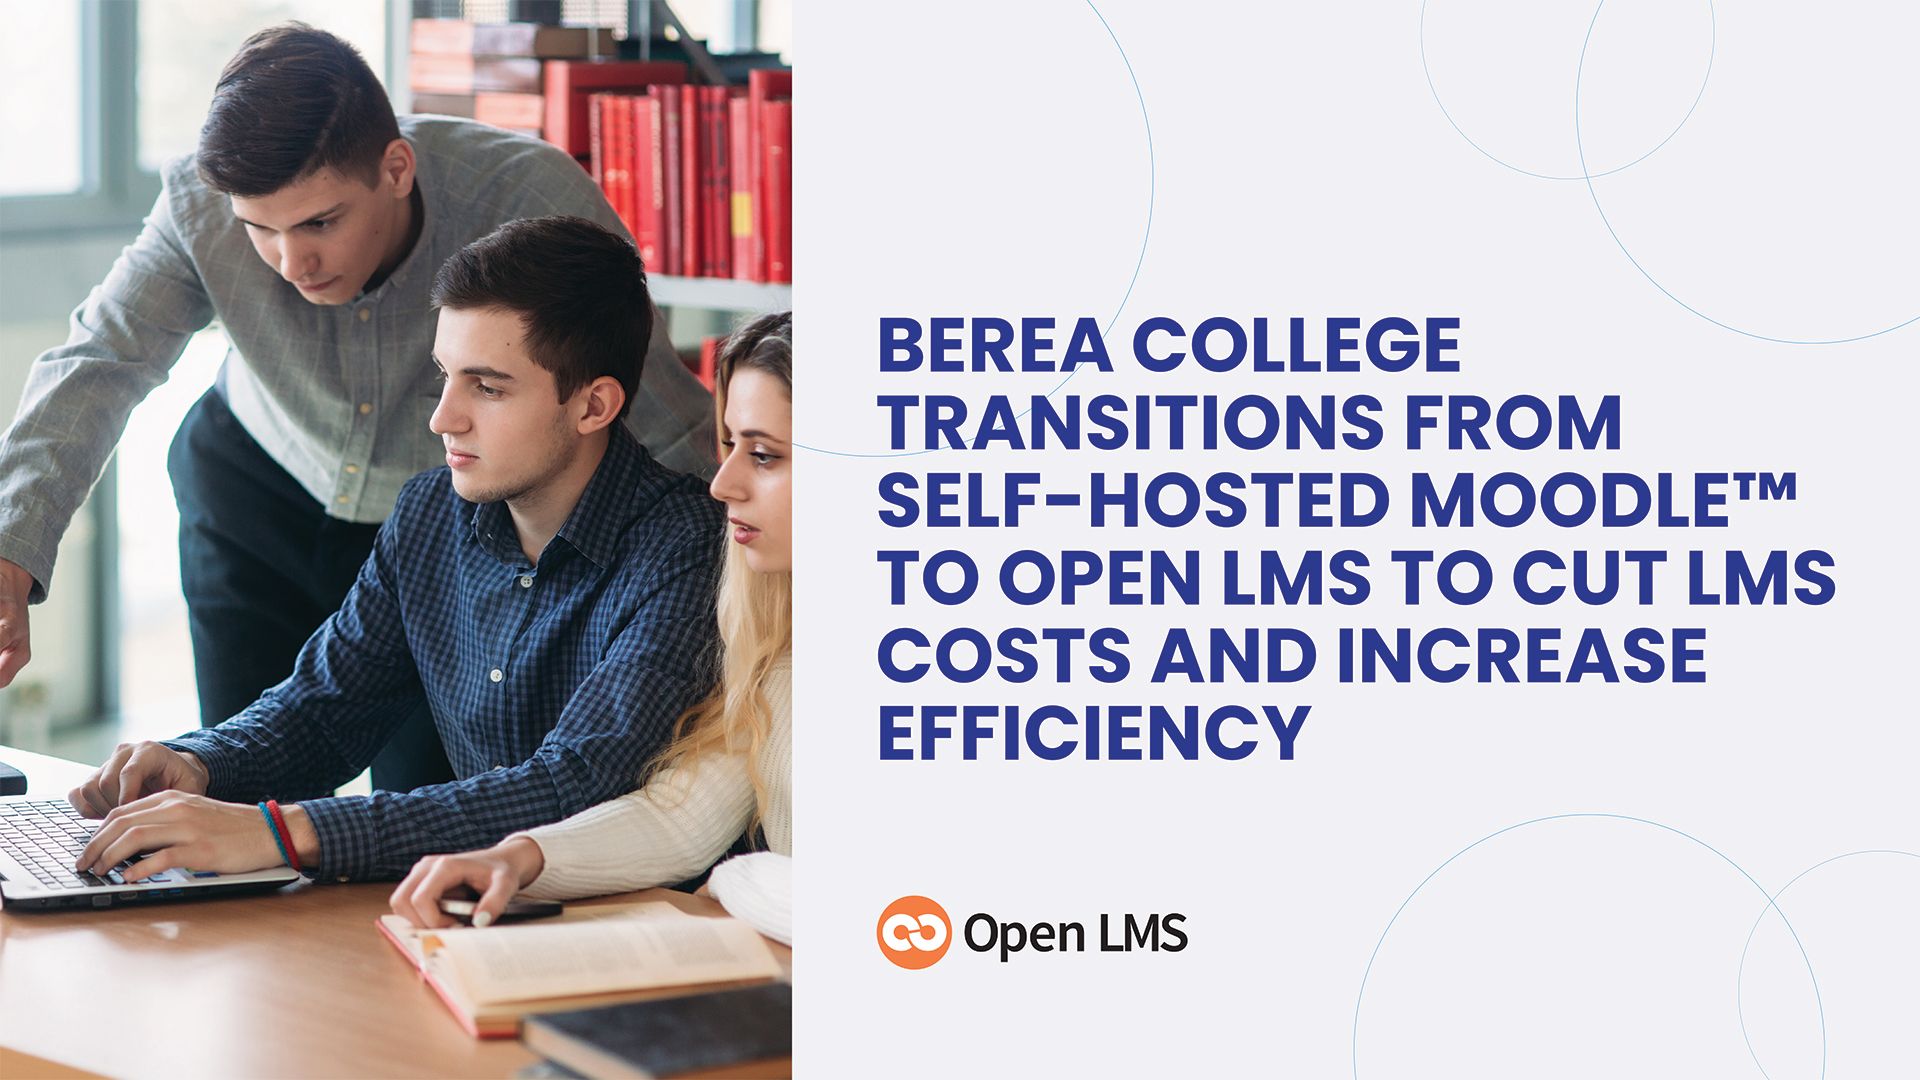 Berea College Transitions From Self-Hosted Moodle™ to Open LMS to Cut LMS Costs and Increase Efficiency